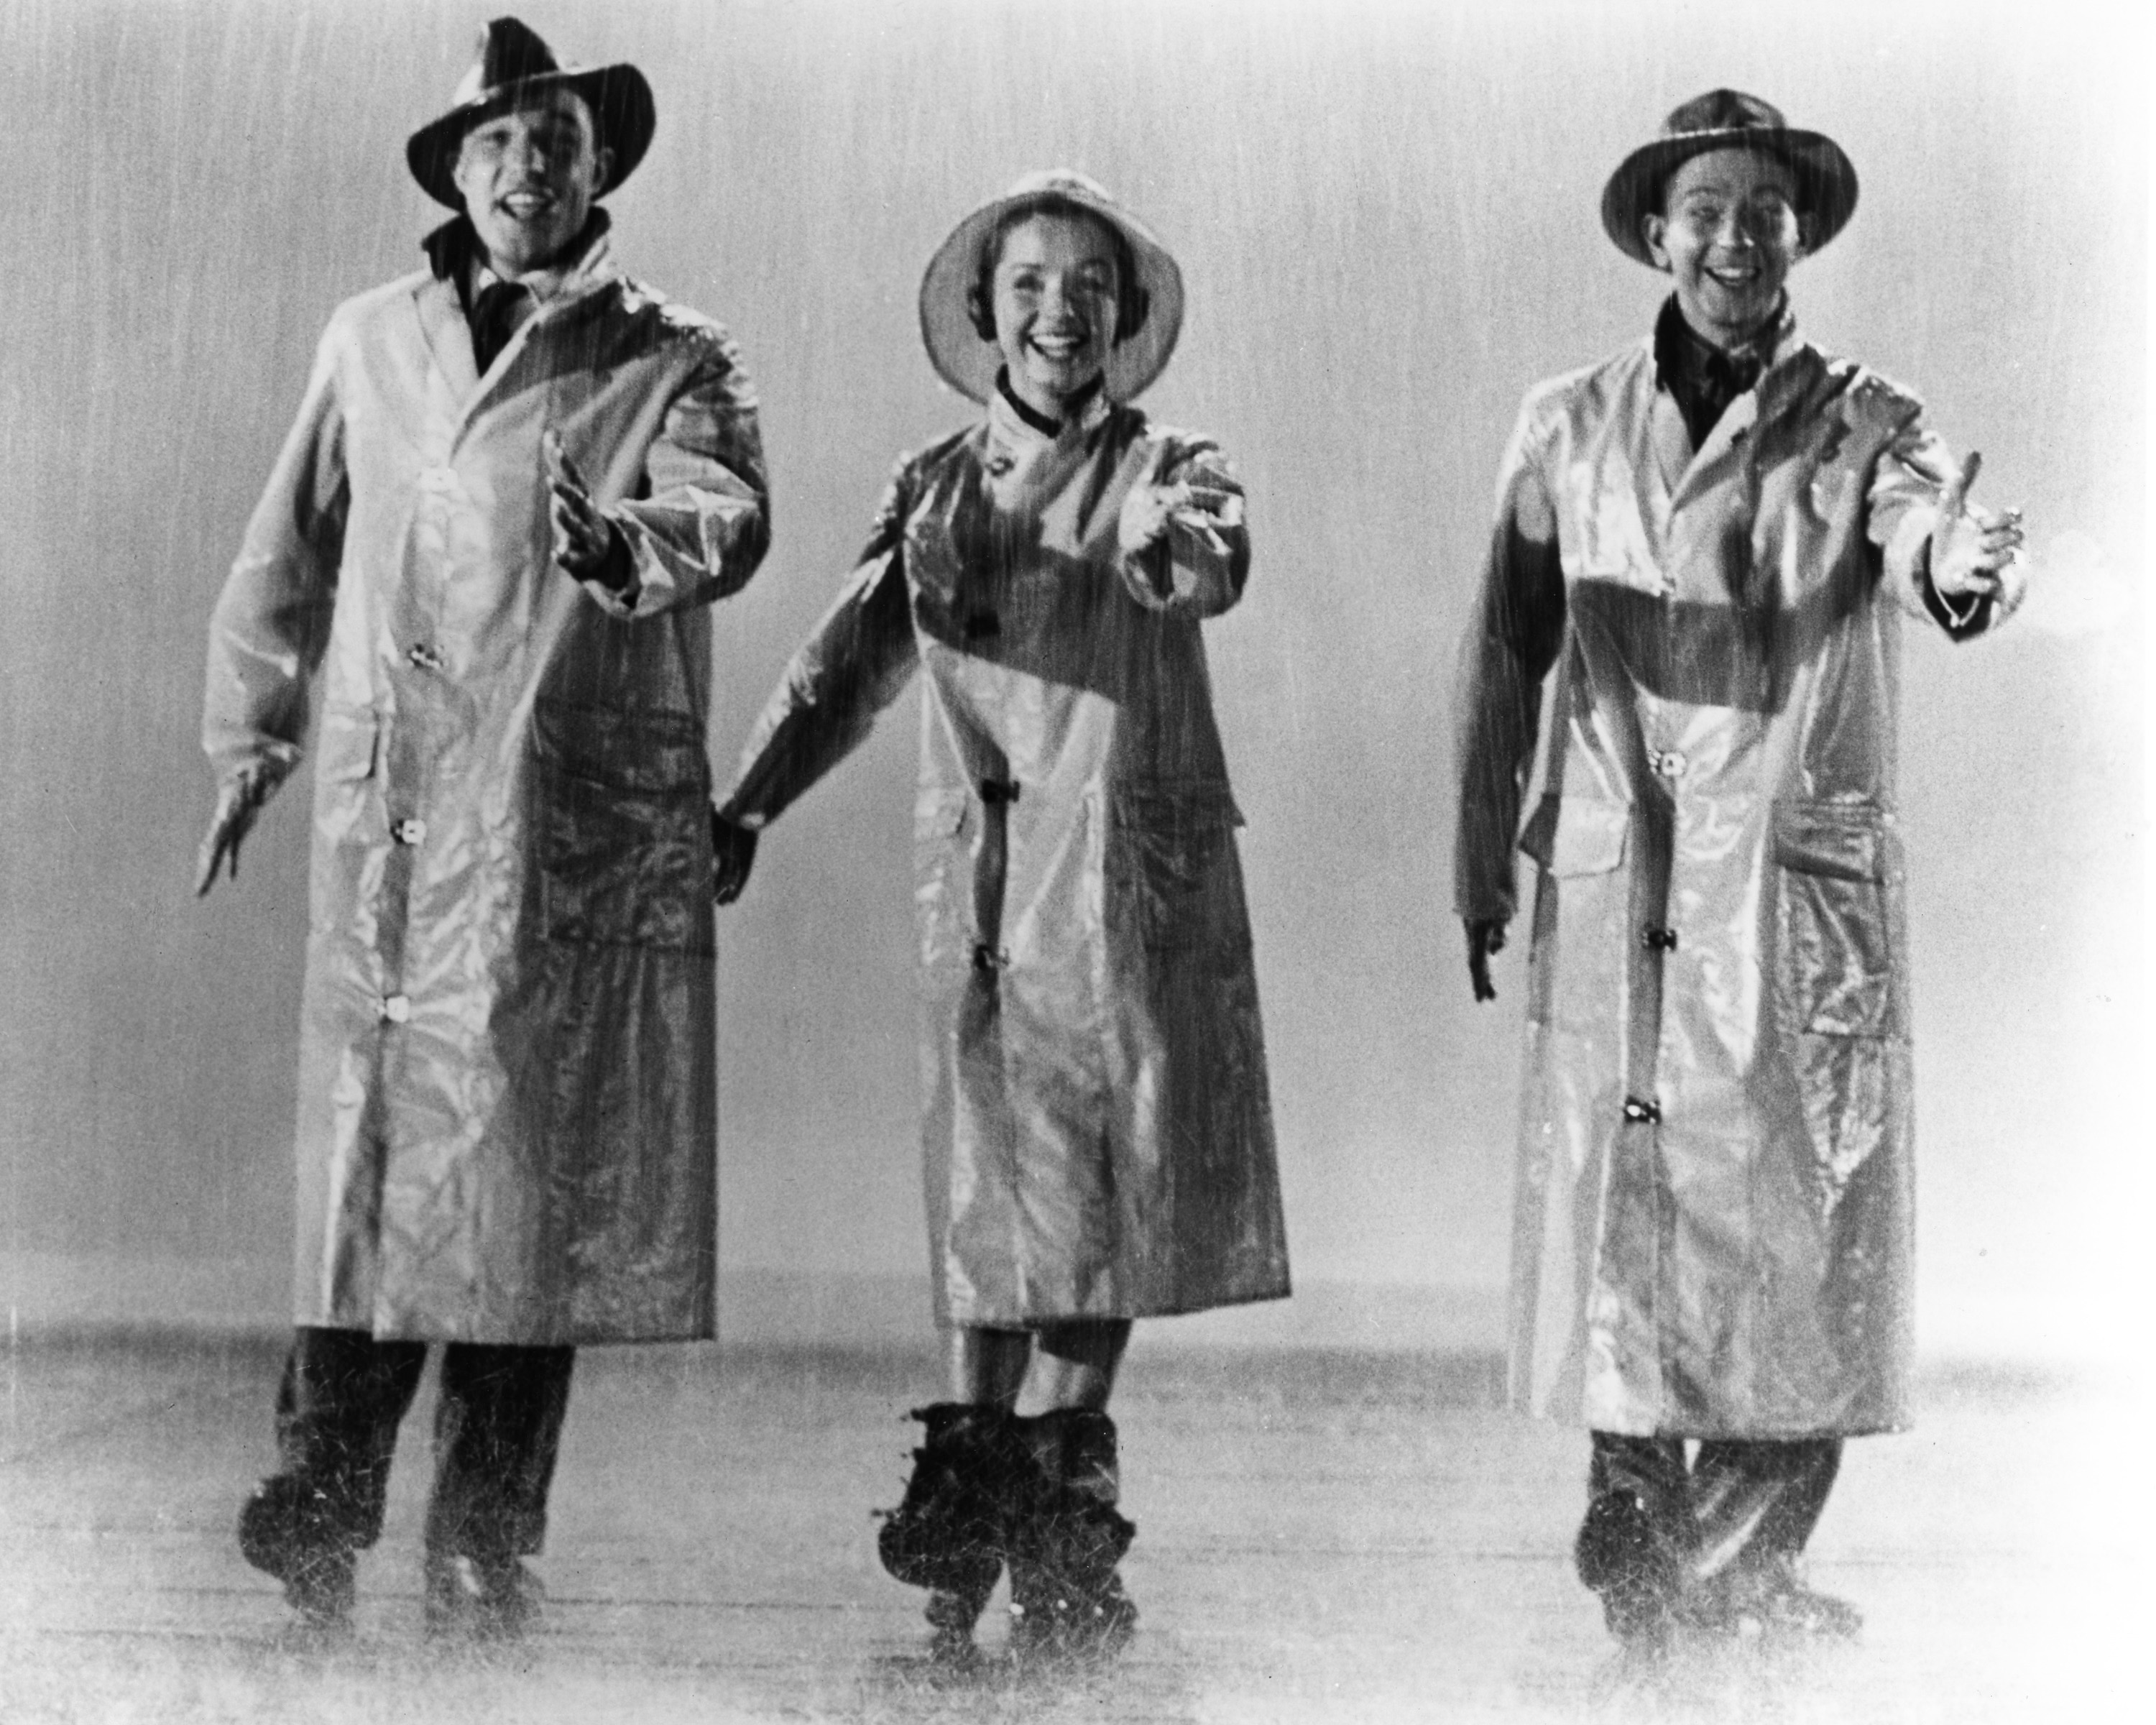 From left, Gene Kelly, Debbie Reynolds, and Donald O'Connor in 'Singin' In the Rain', 1952